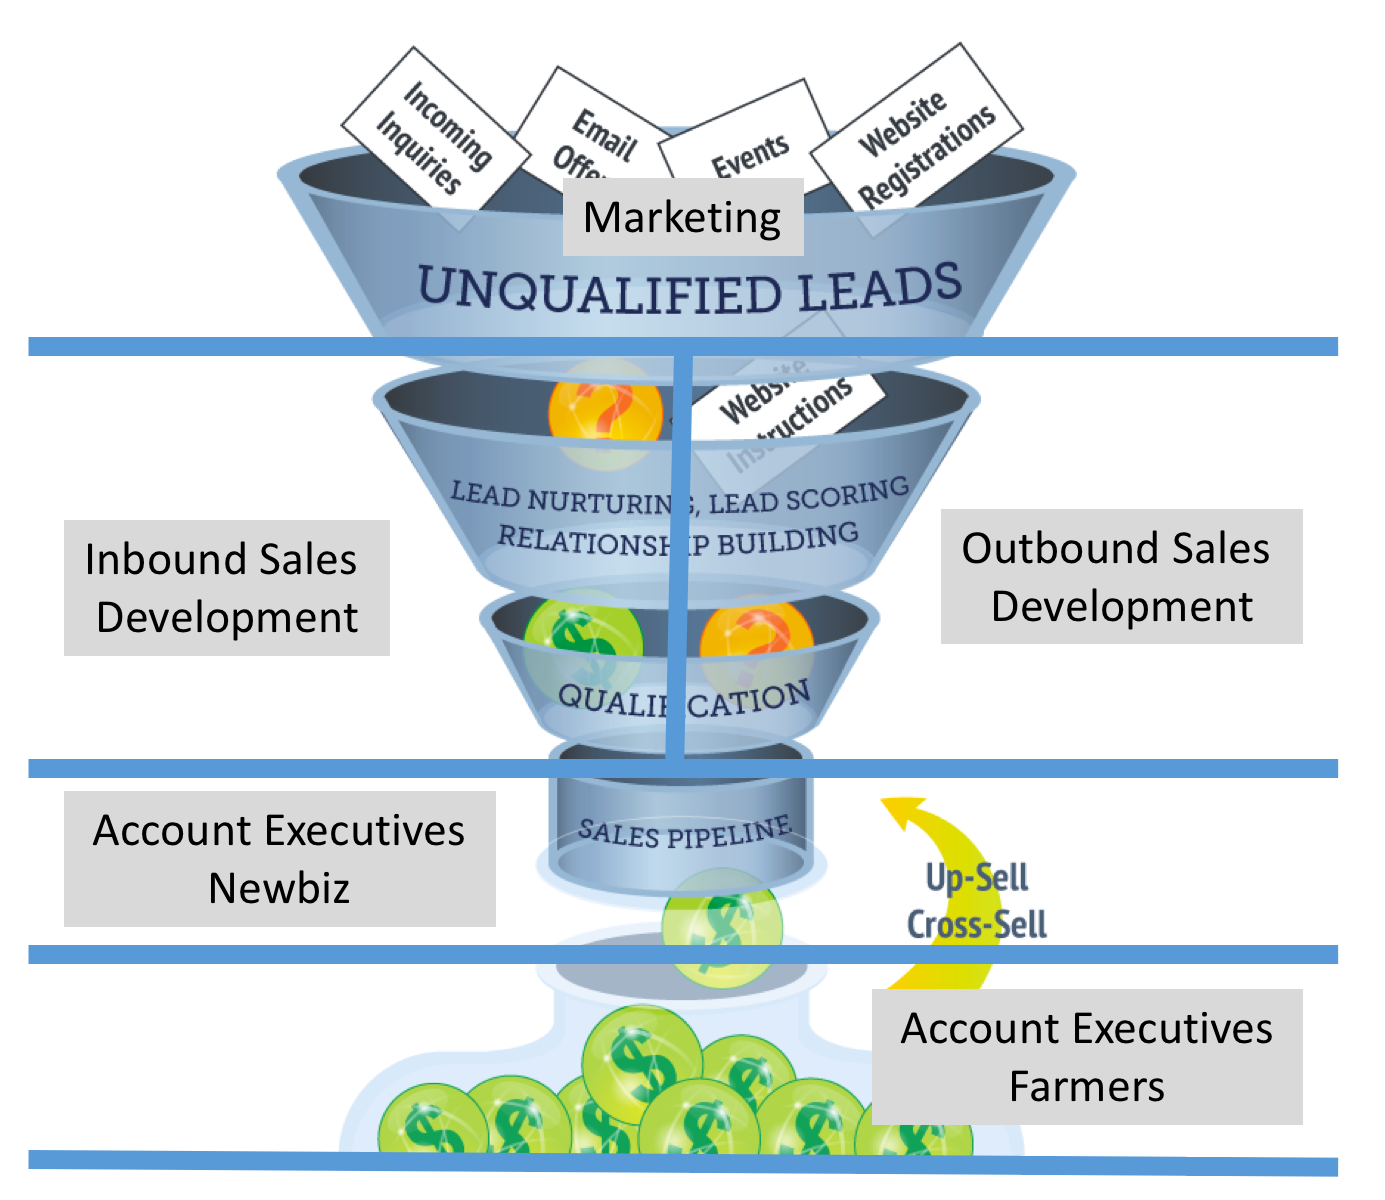 Sales development responsibilities fall between marketing and sales in the B2B funnel.